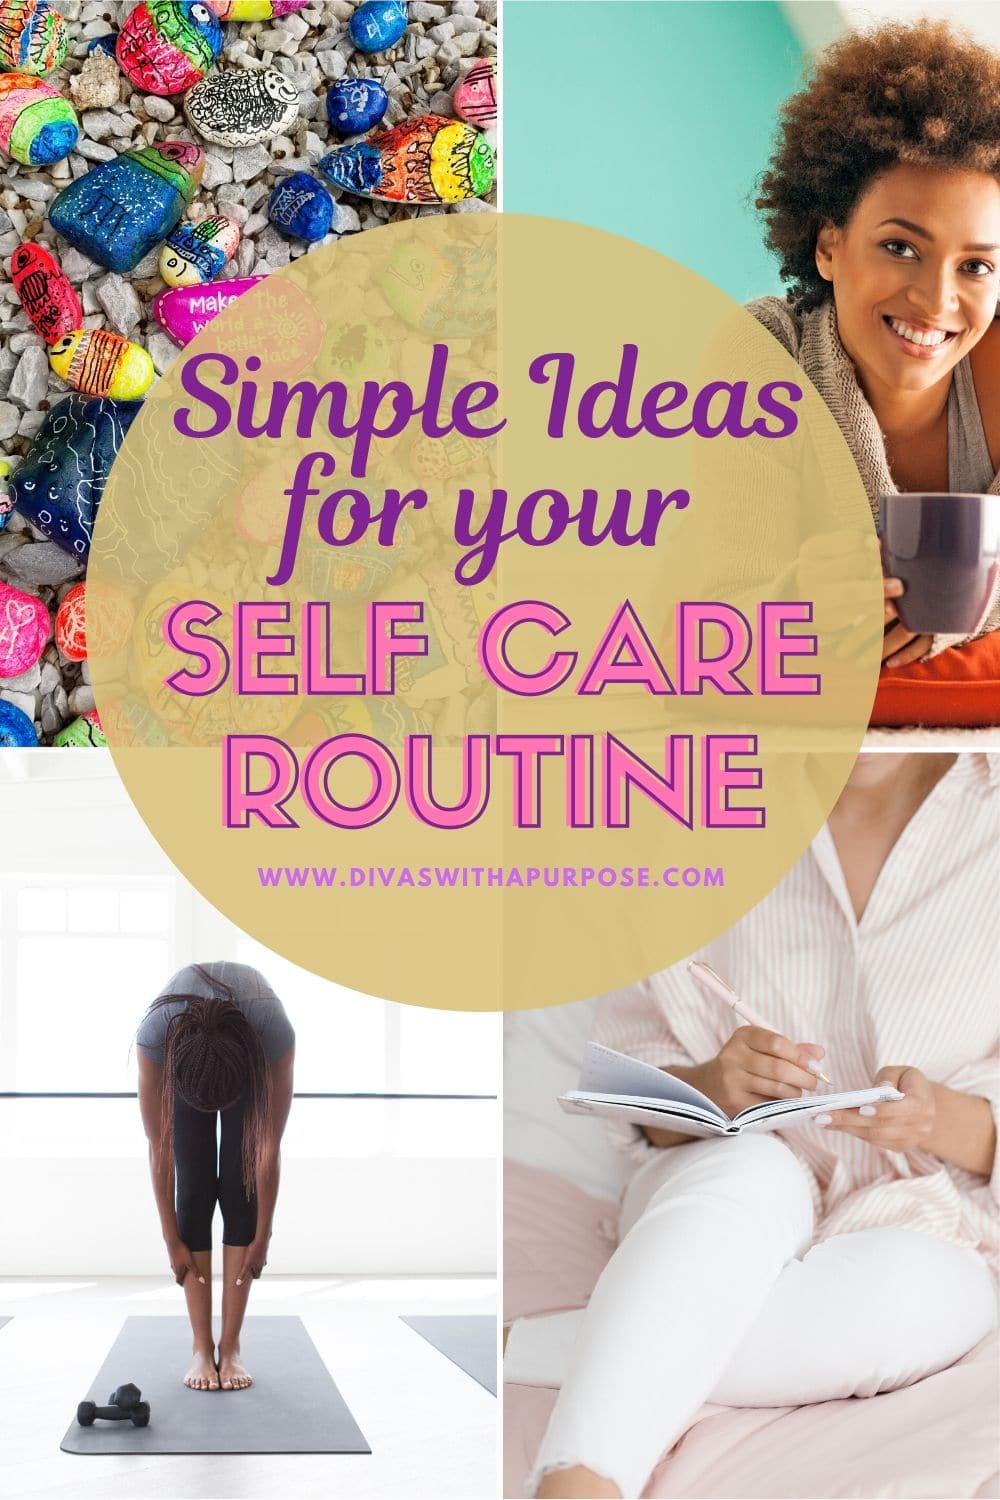 It is important to create a self care routine that nourishes all aspects of our life - physical, emotional, spiritual, and mental. #selfcare #dailyroutine #selfcarechallenge